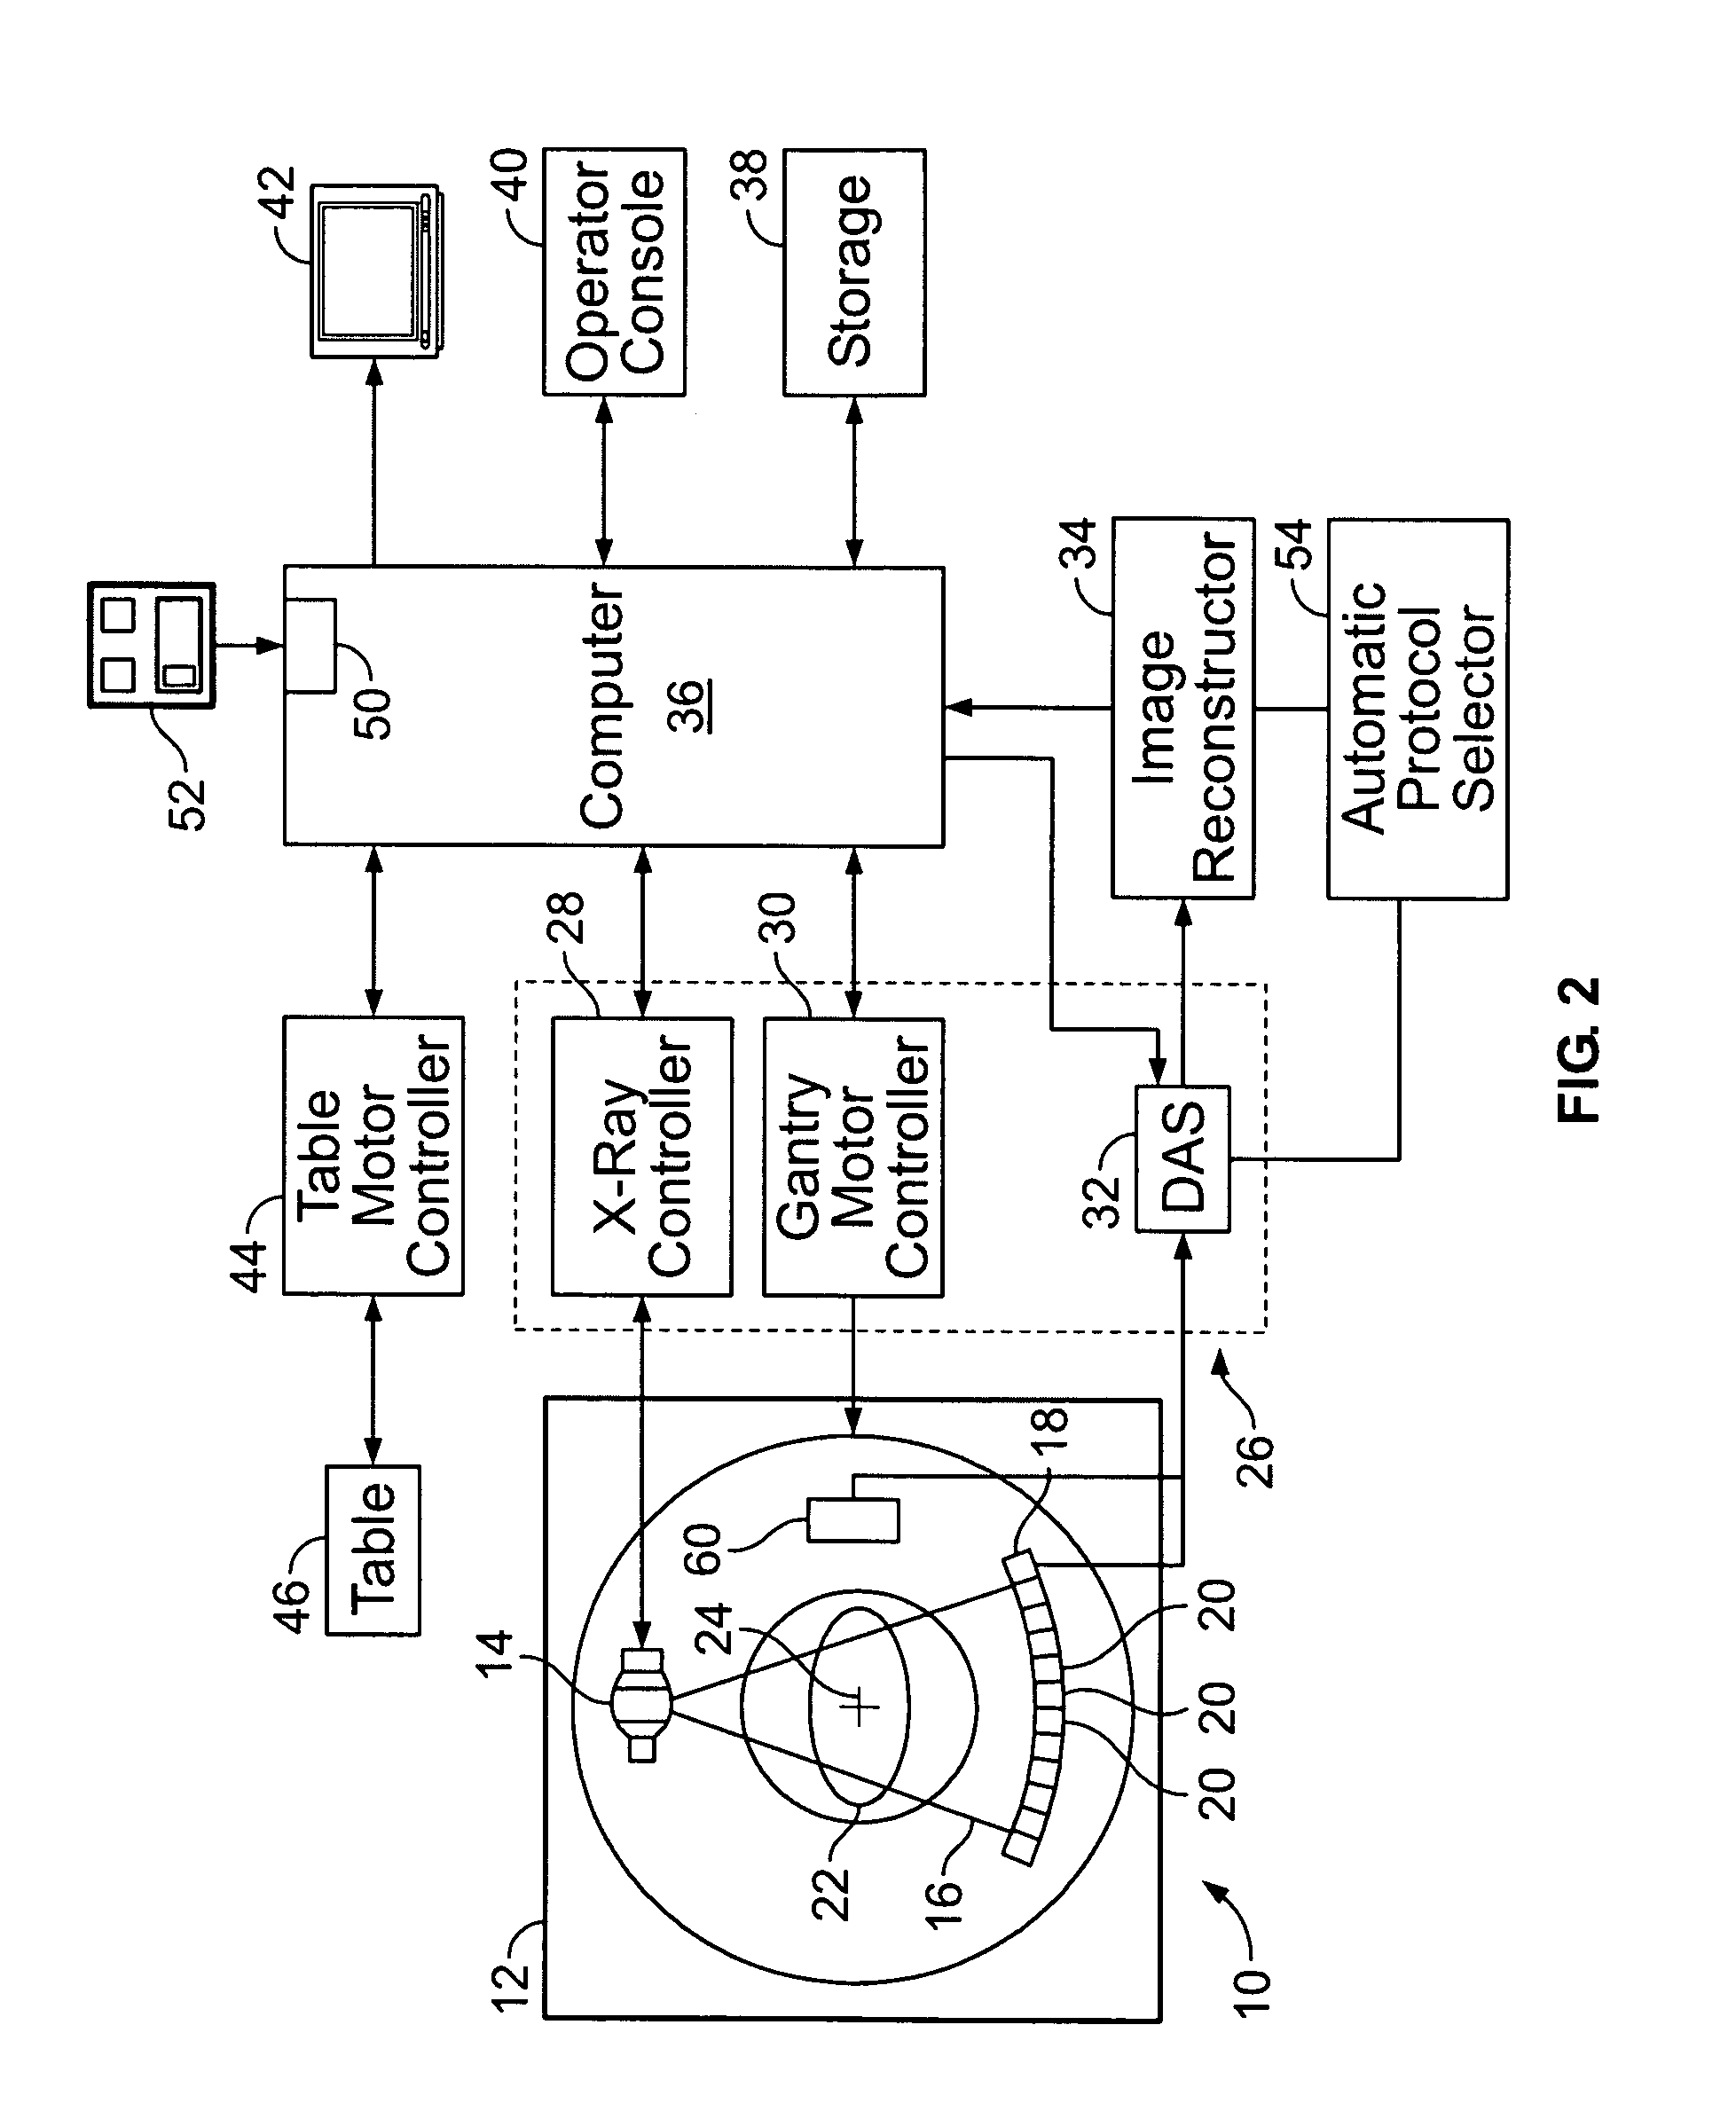 Multi modality imaging methods and apparatus